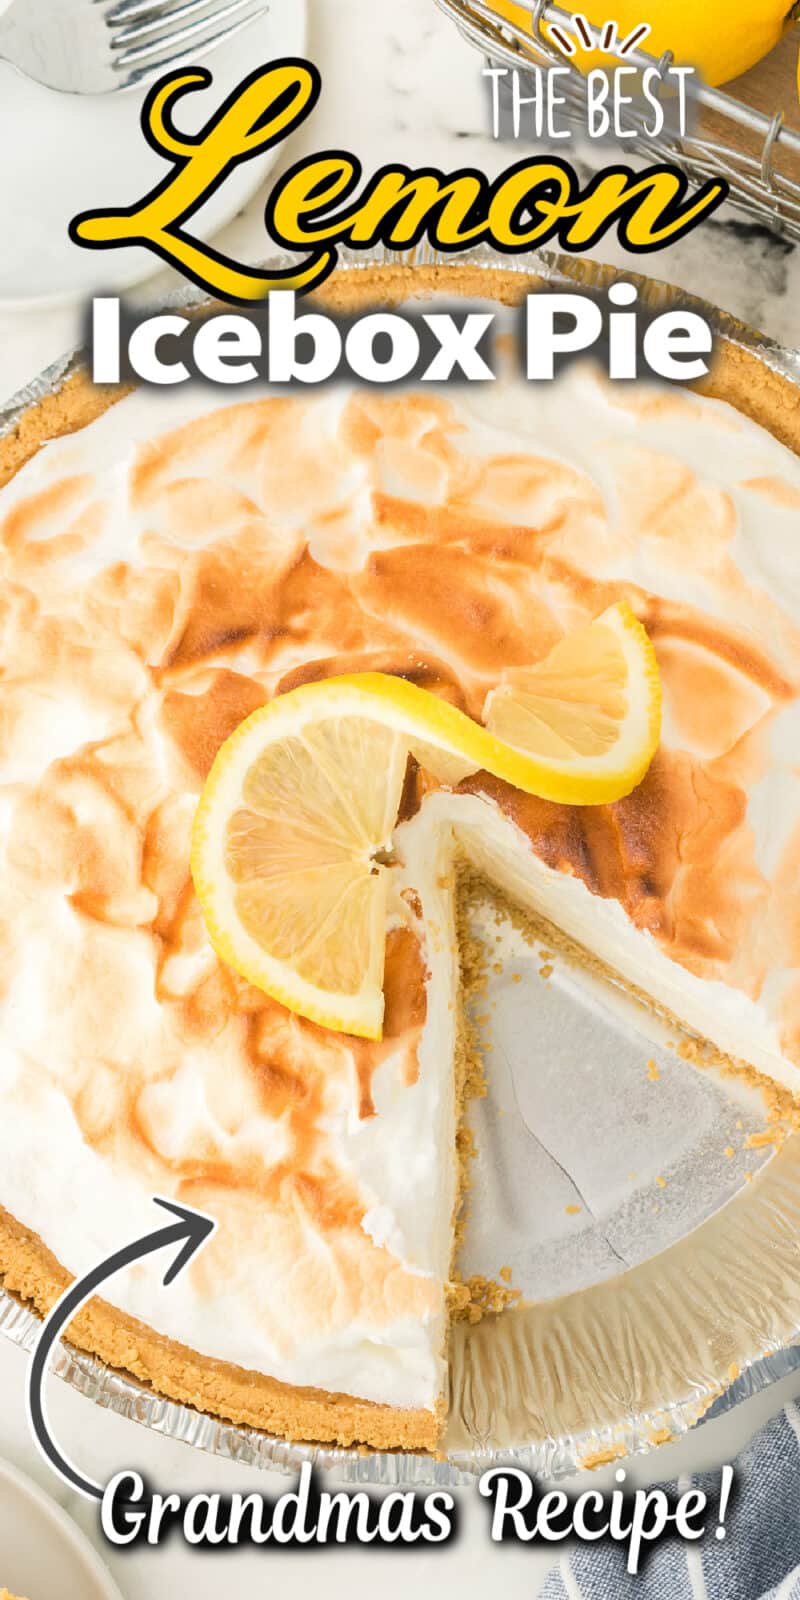 a lemon pie with a slice taken out with text